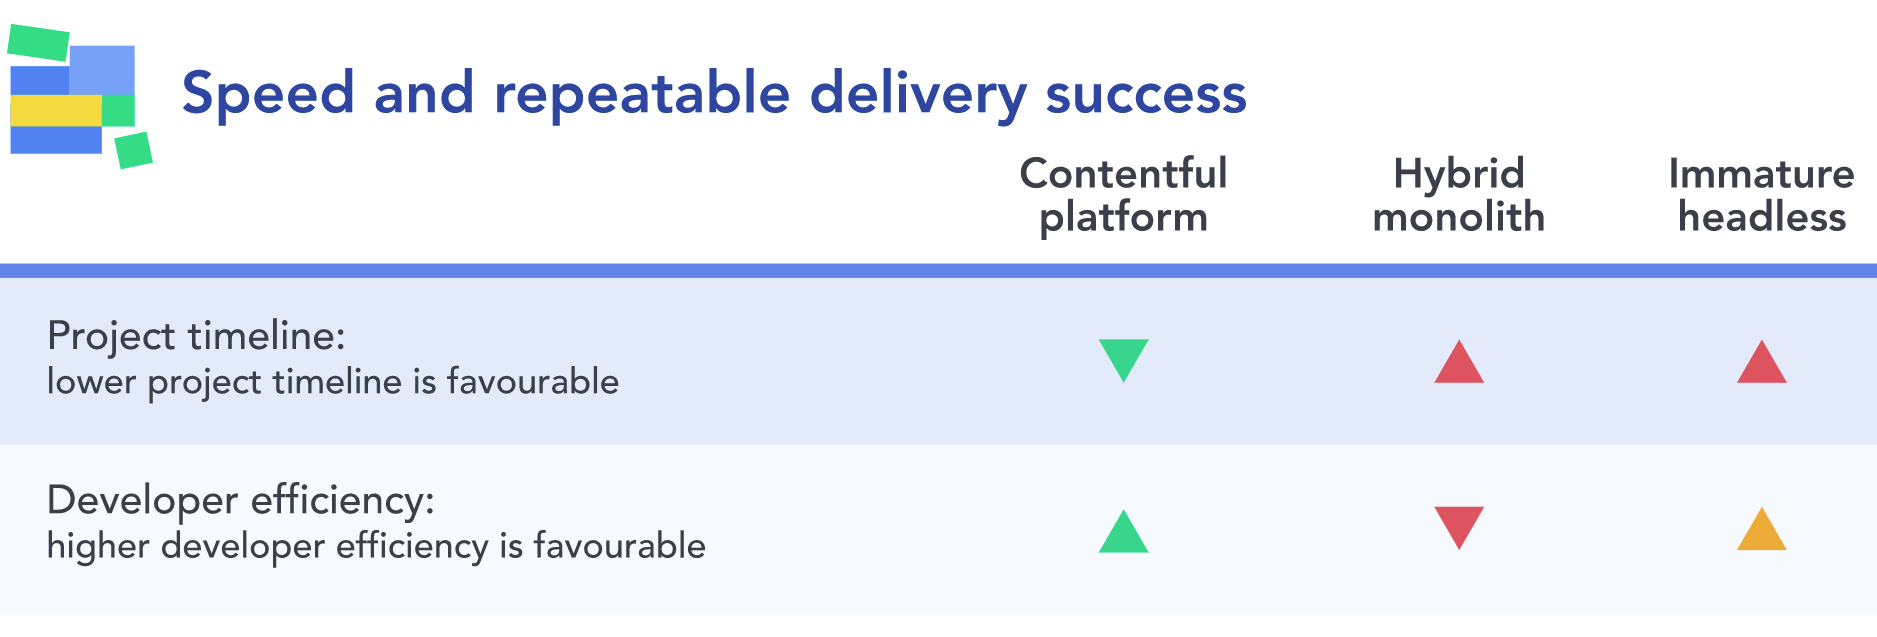 Graphic comparing a content platform's, hybrid monolith CMS's, and immature headless CMS's effects of speed and repeatable delivery